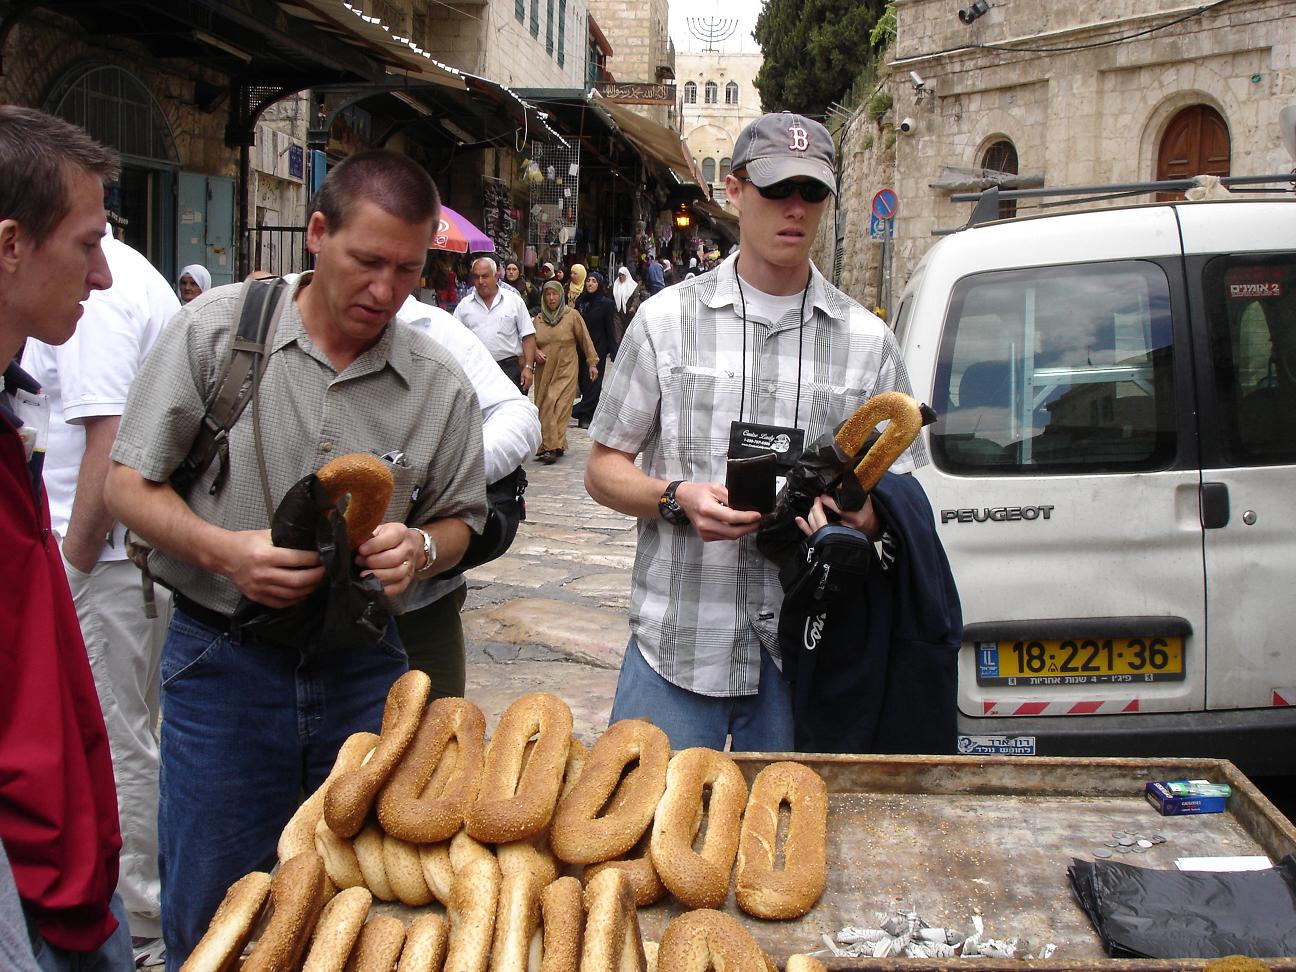 [Buying+the+bread+I+loved+so+much+as+a+child+in+Jerusalem.JPG]